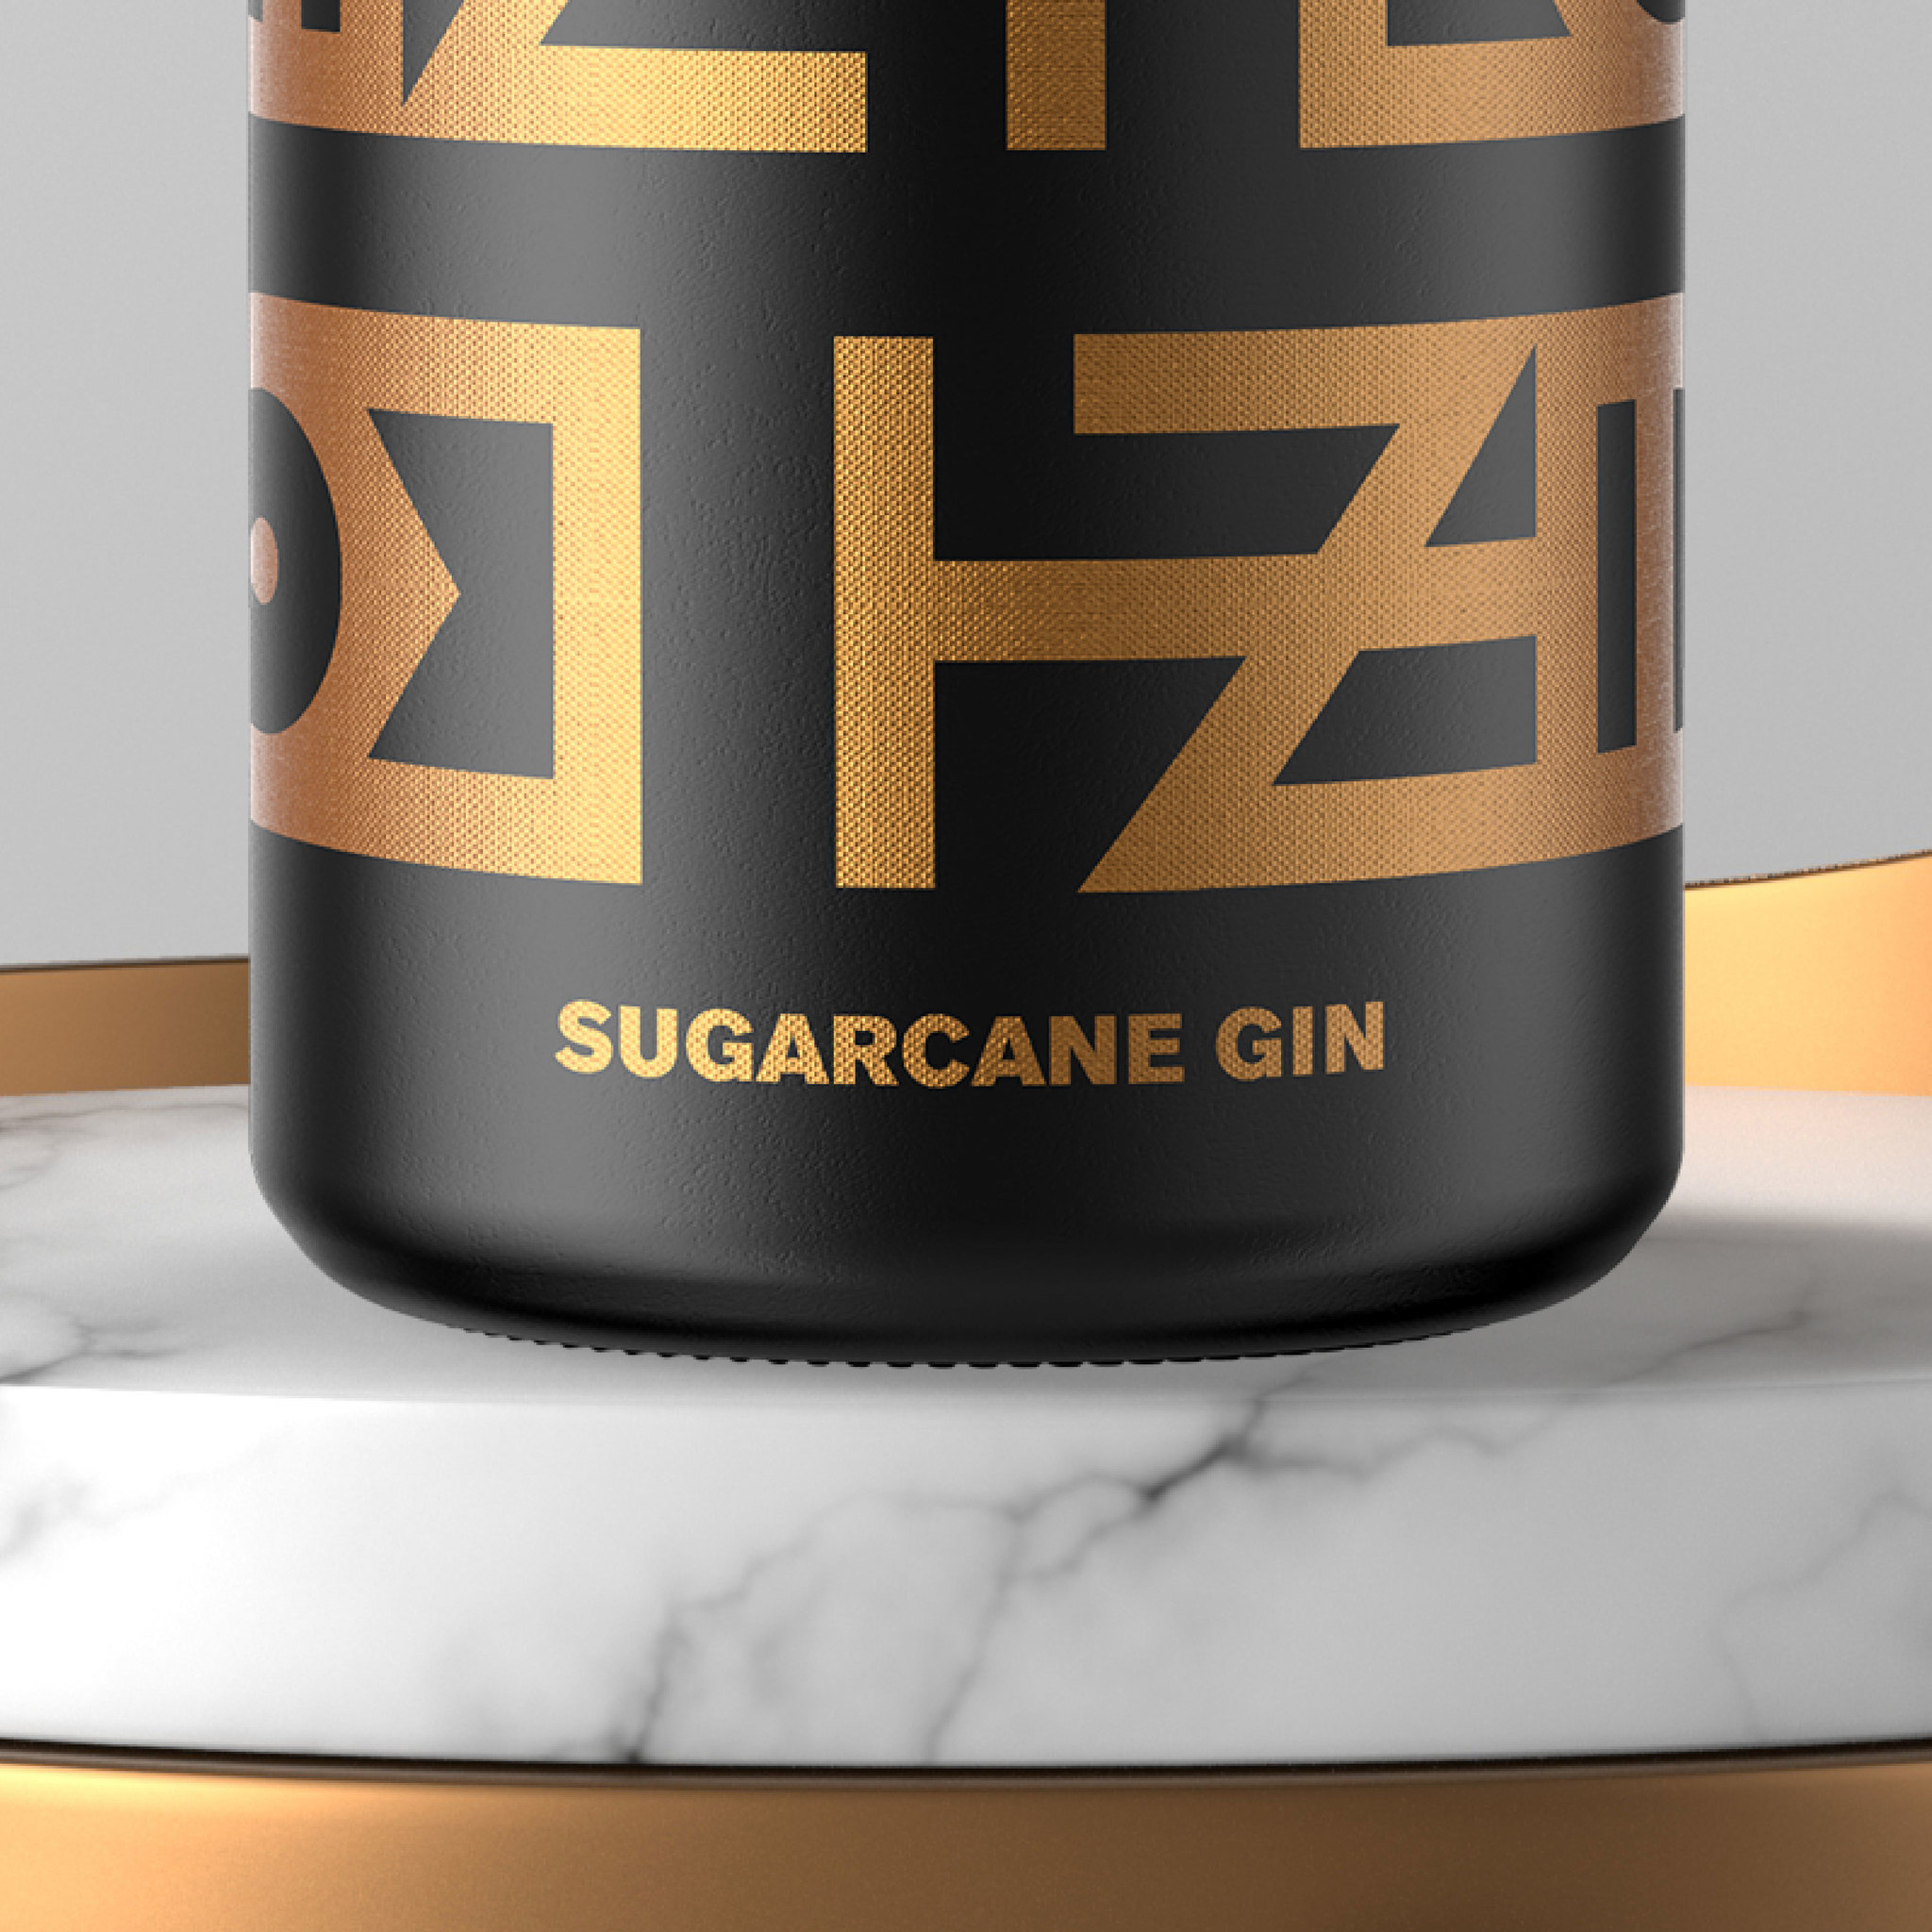 Umodzi Gin – Packaging From an African Perspective